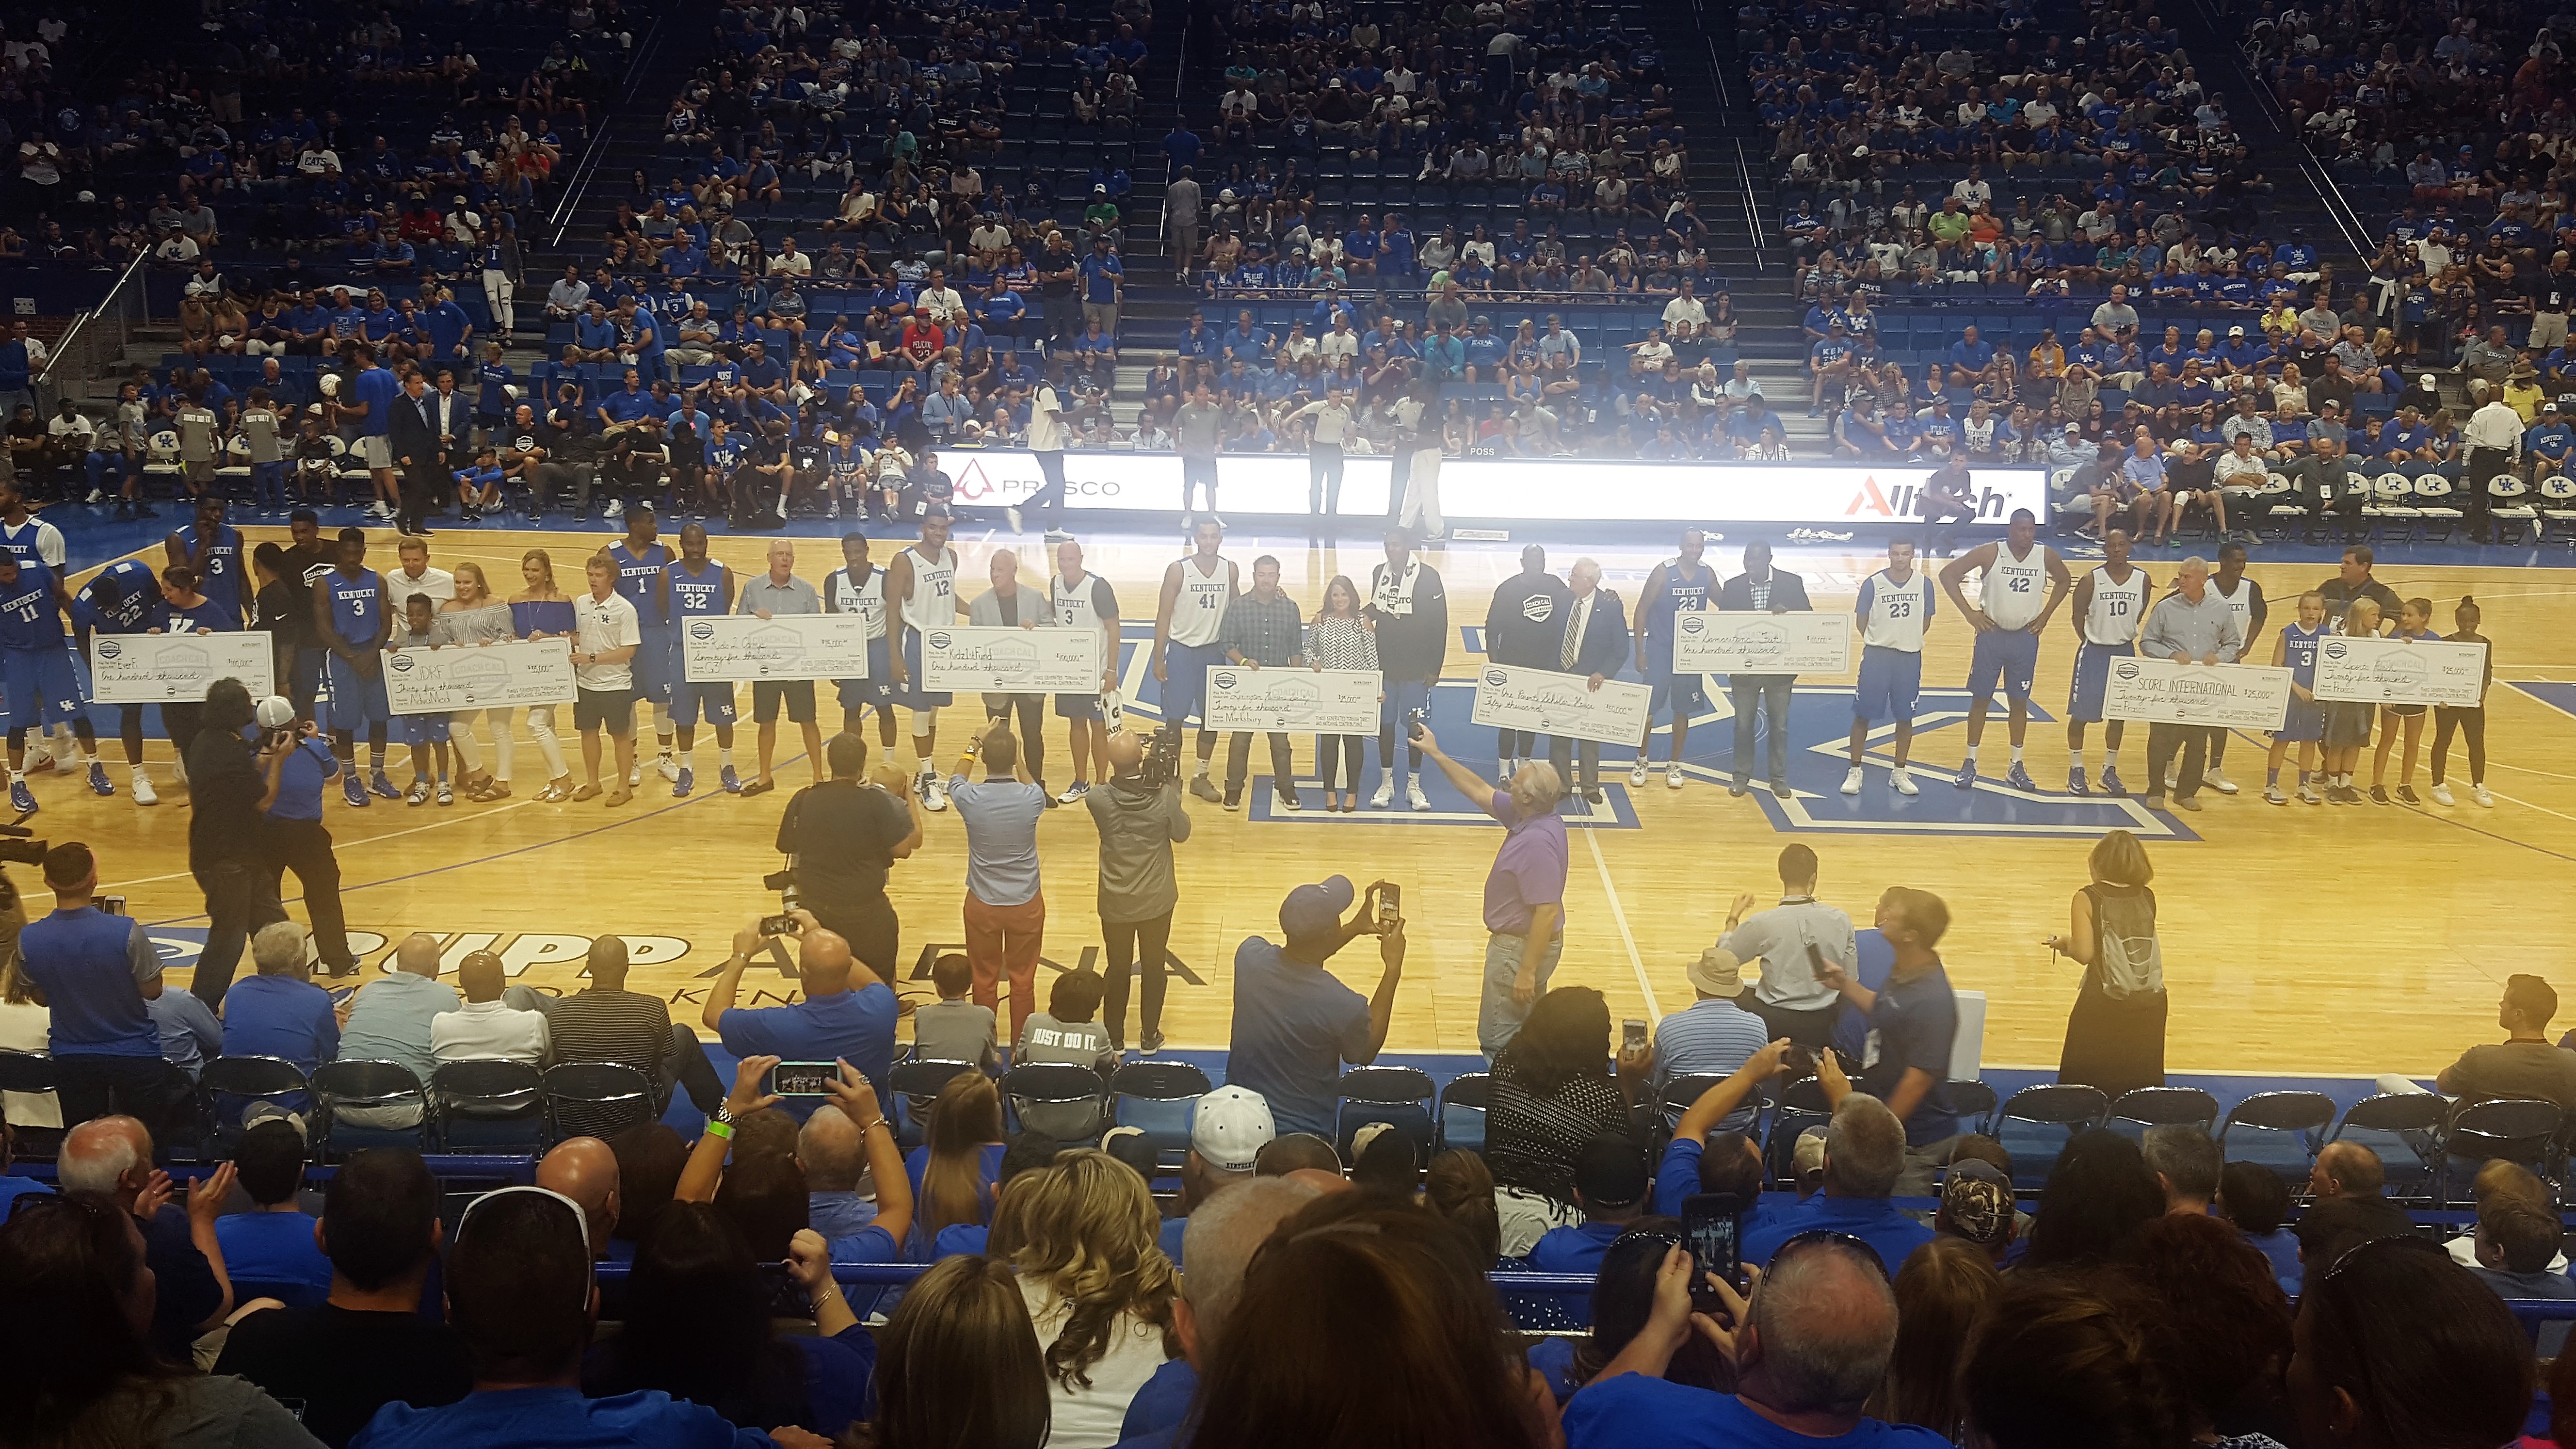 Gallery  NBA exhibition game at Rupp Arena